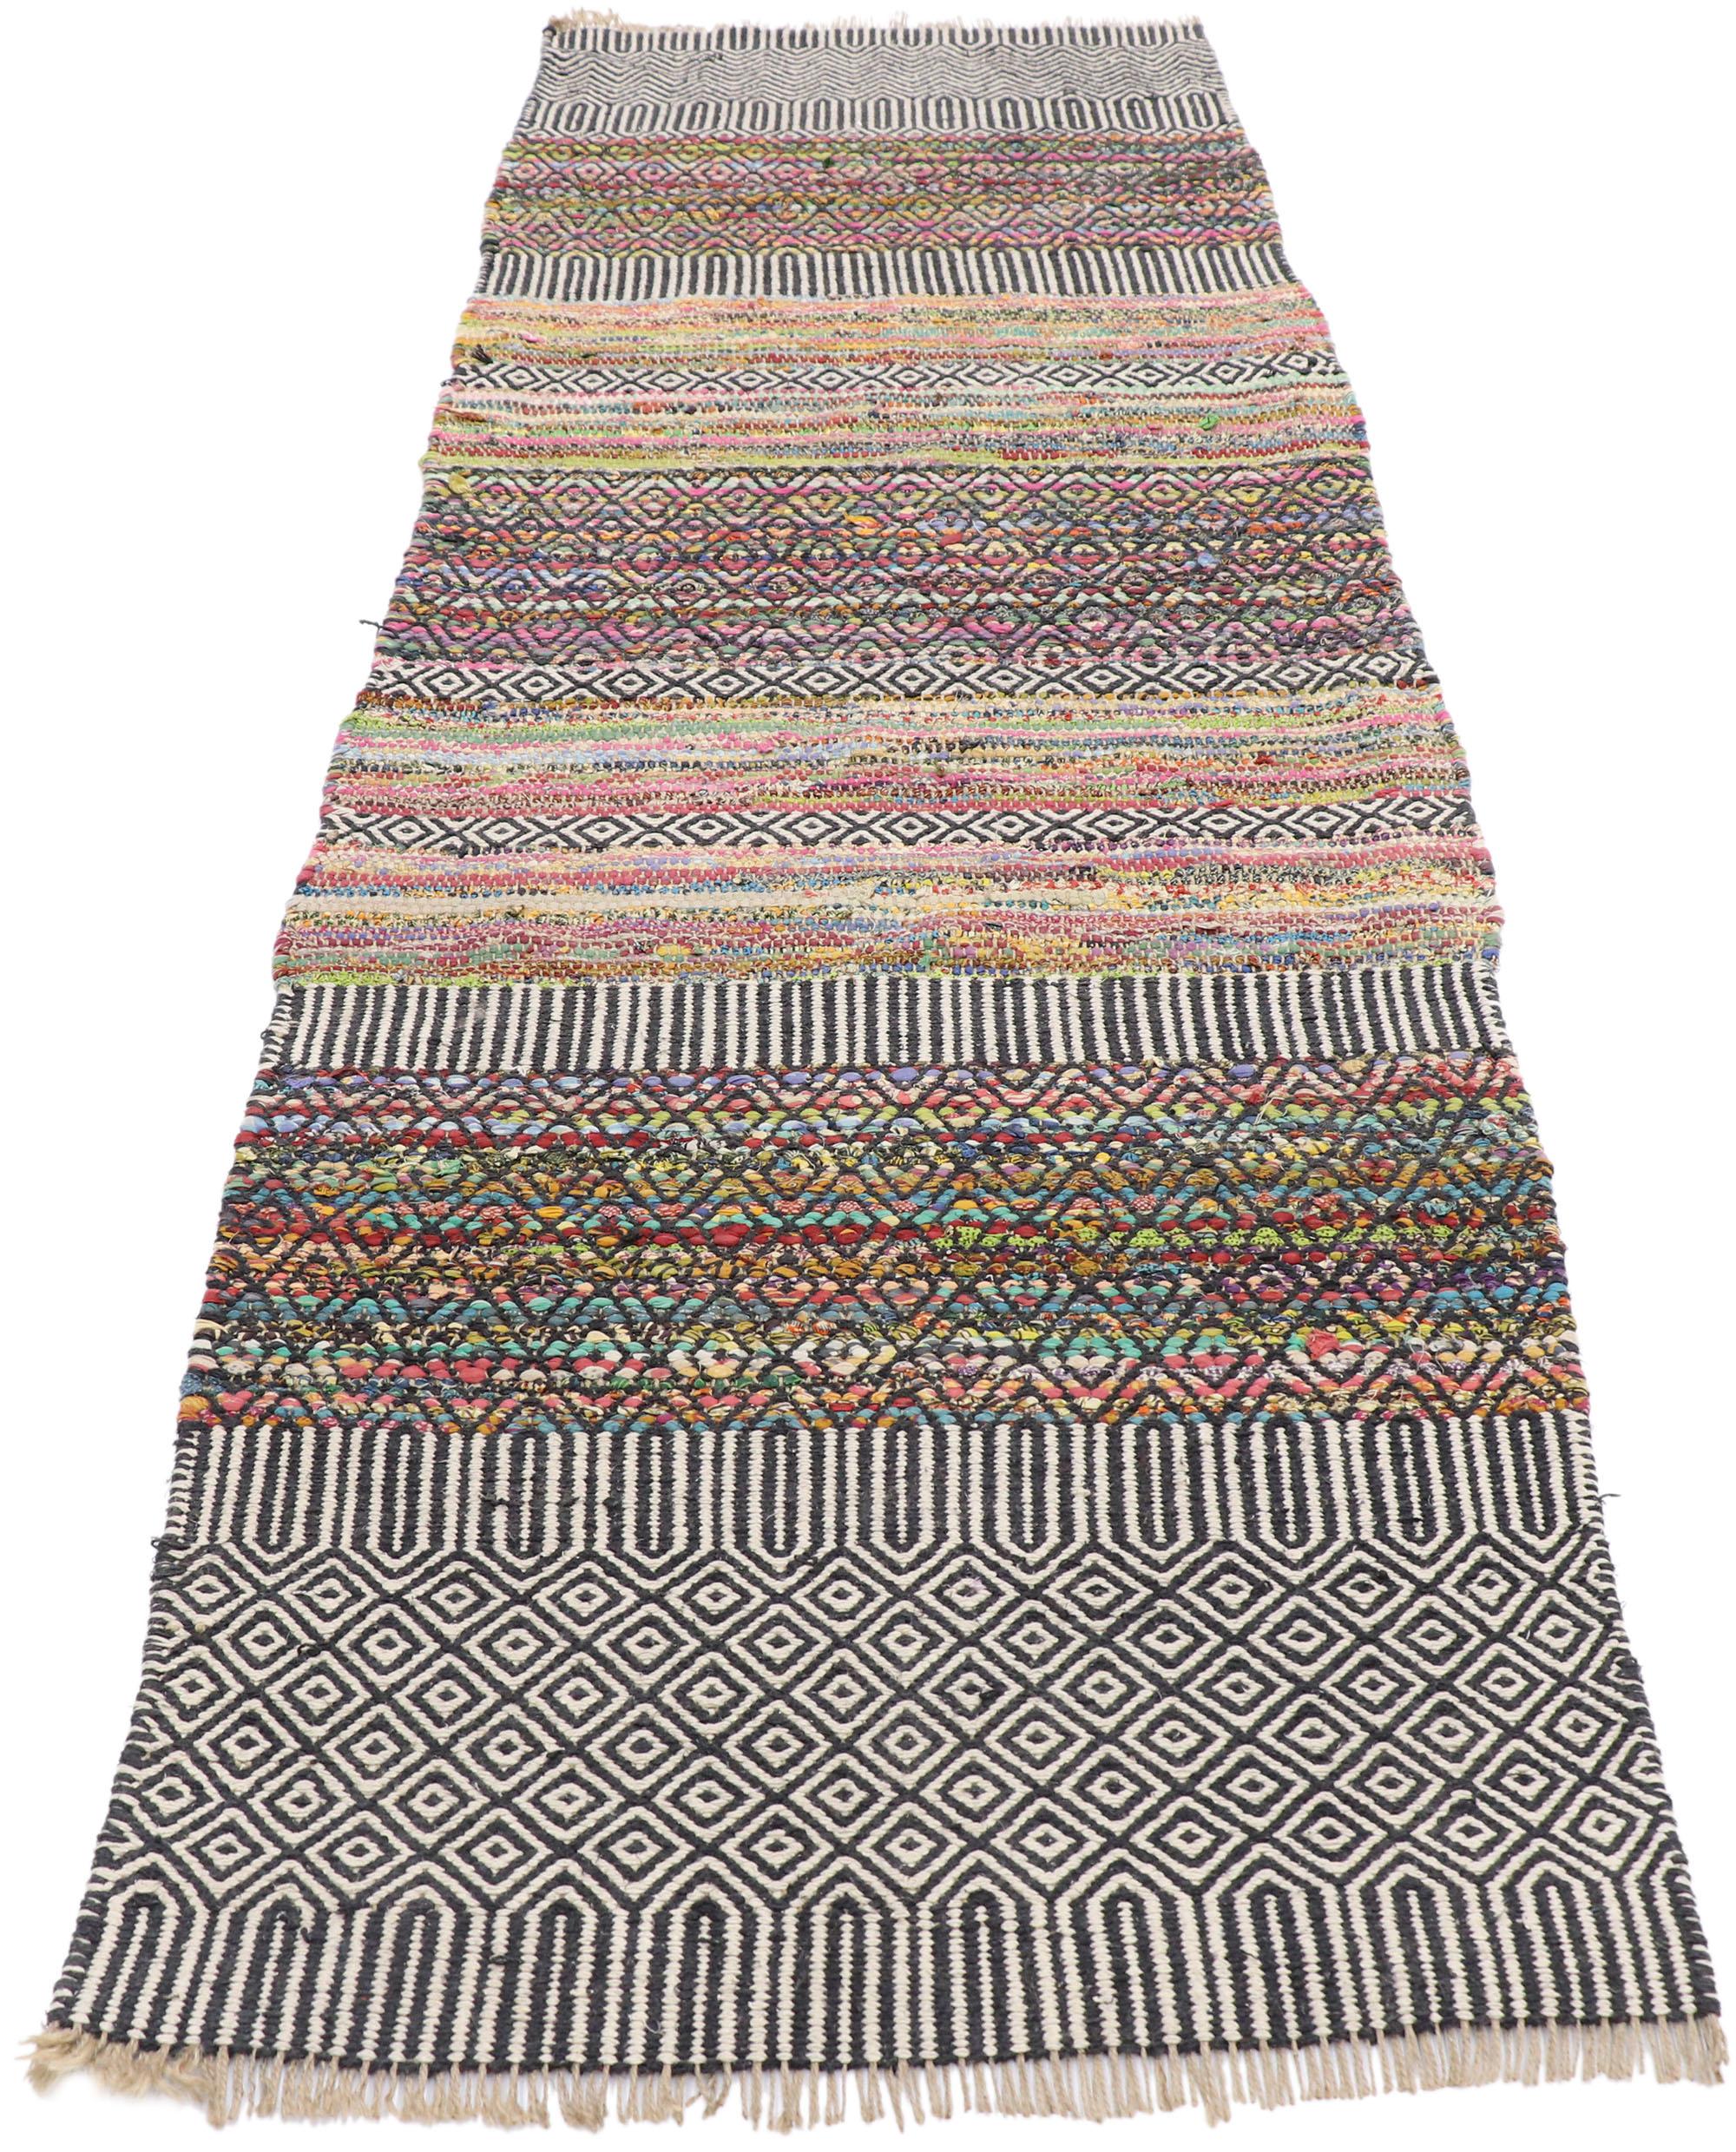 Hand-Woven Vintage Zemmour Berber Moroccan Kilim Rug with Boho Chic Tribal Style